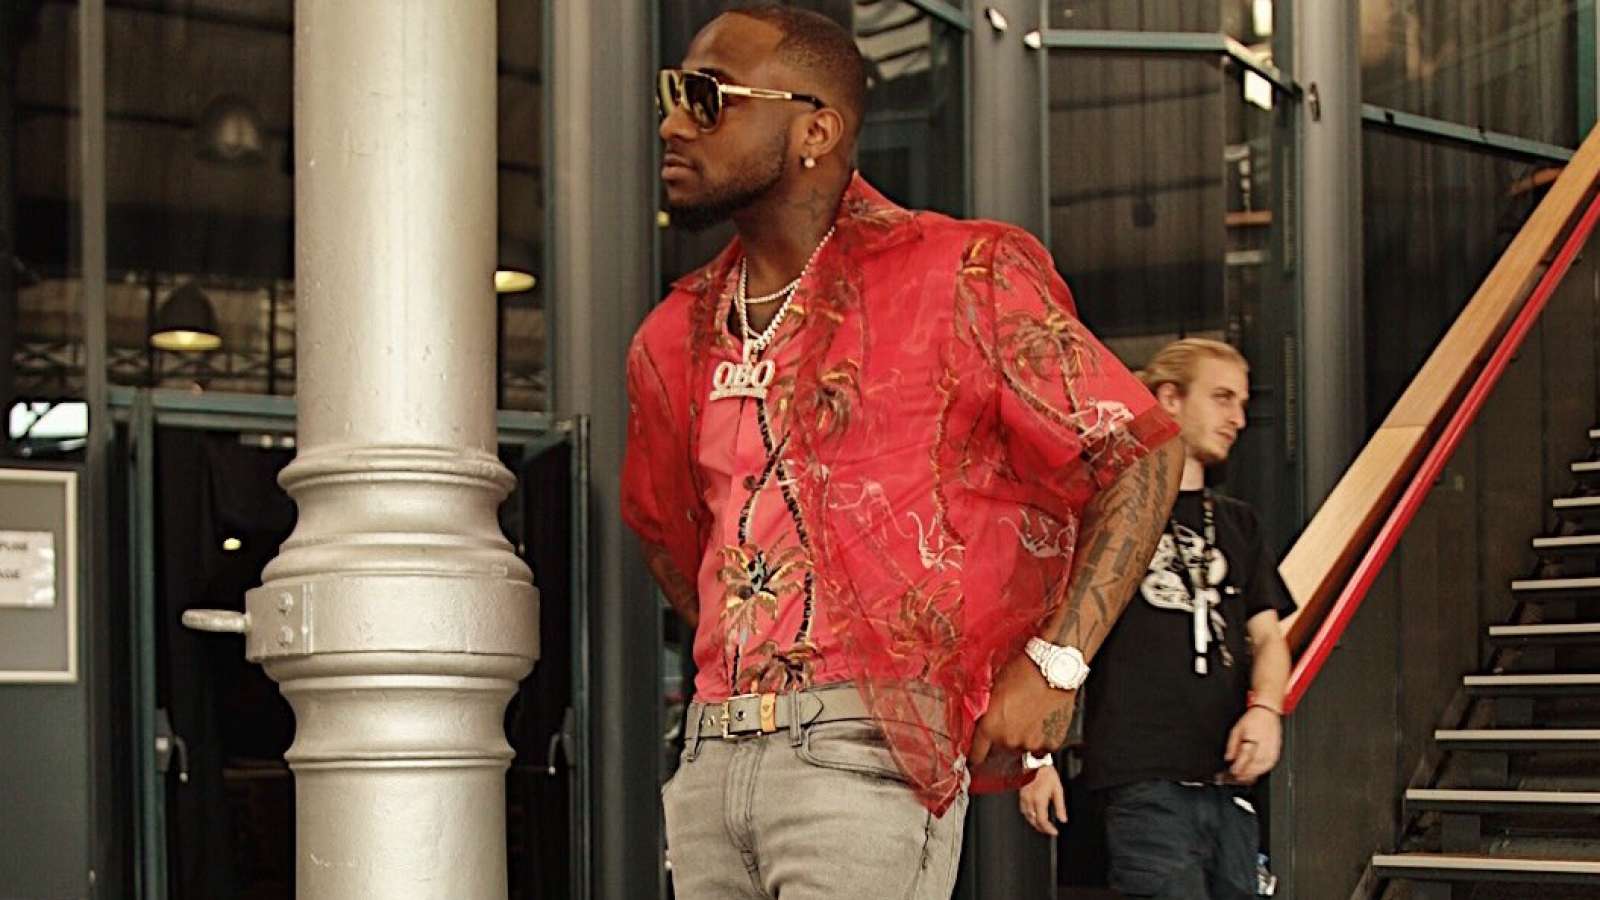 Watch Davido's performance in Paris after France World Cup win